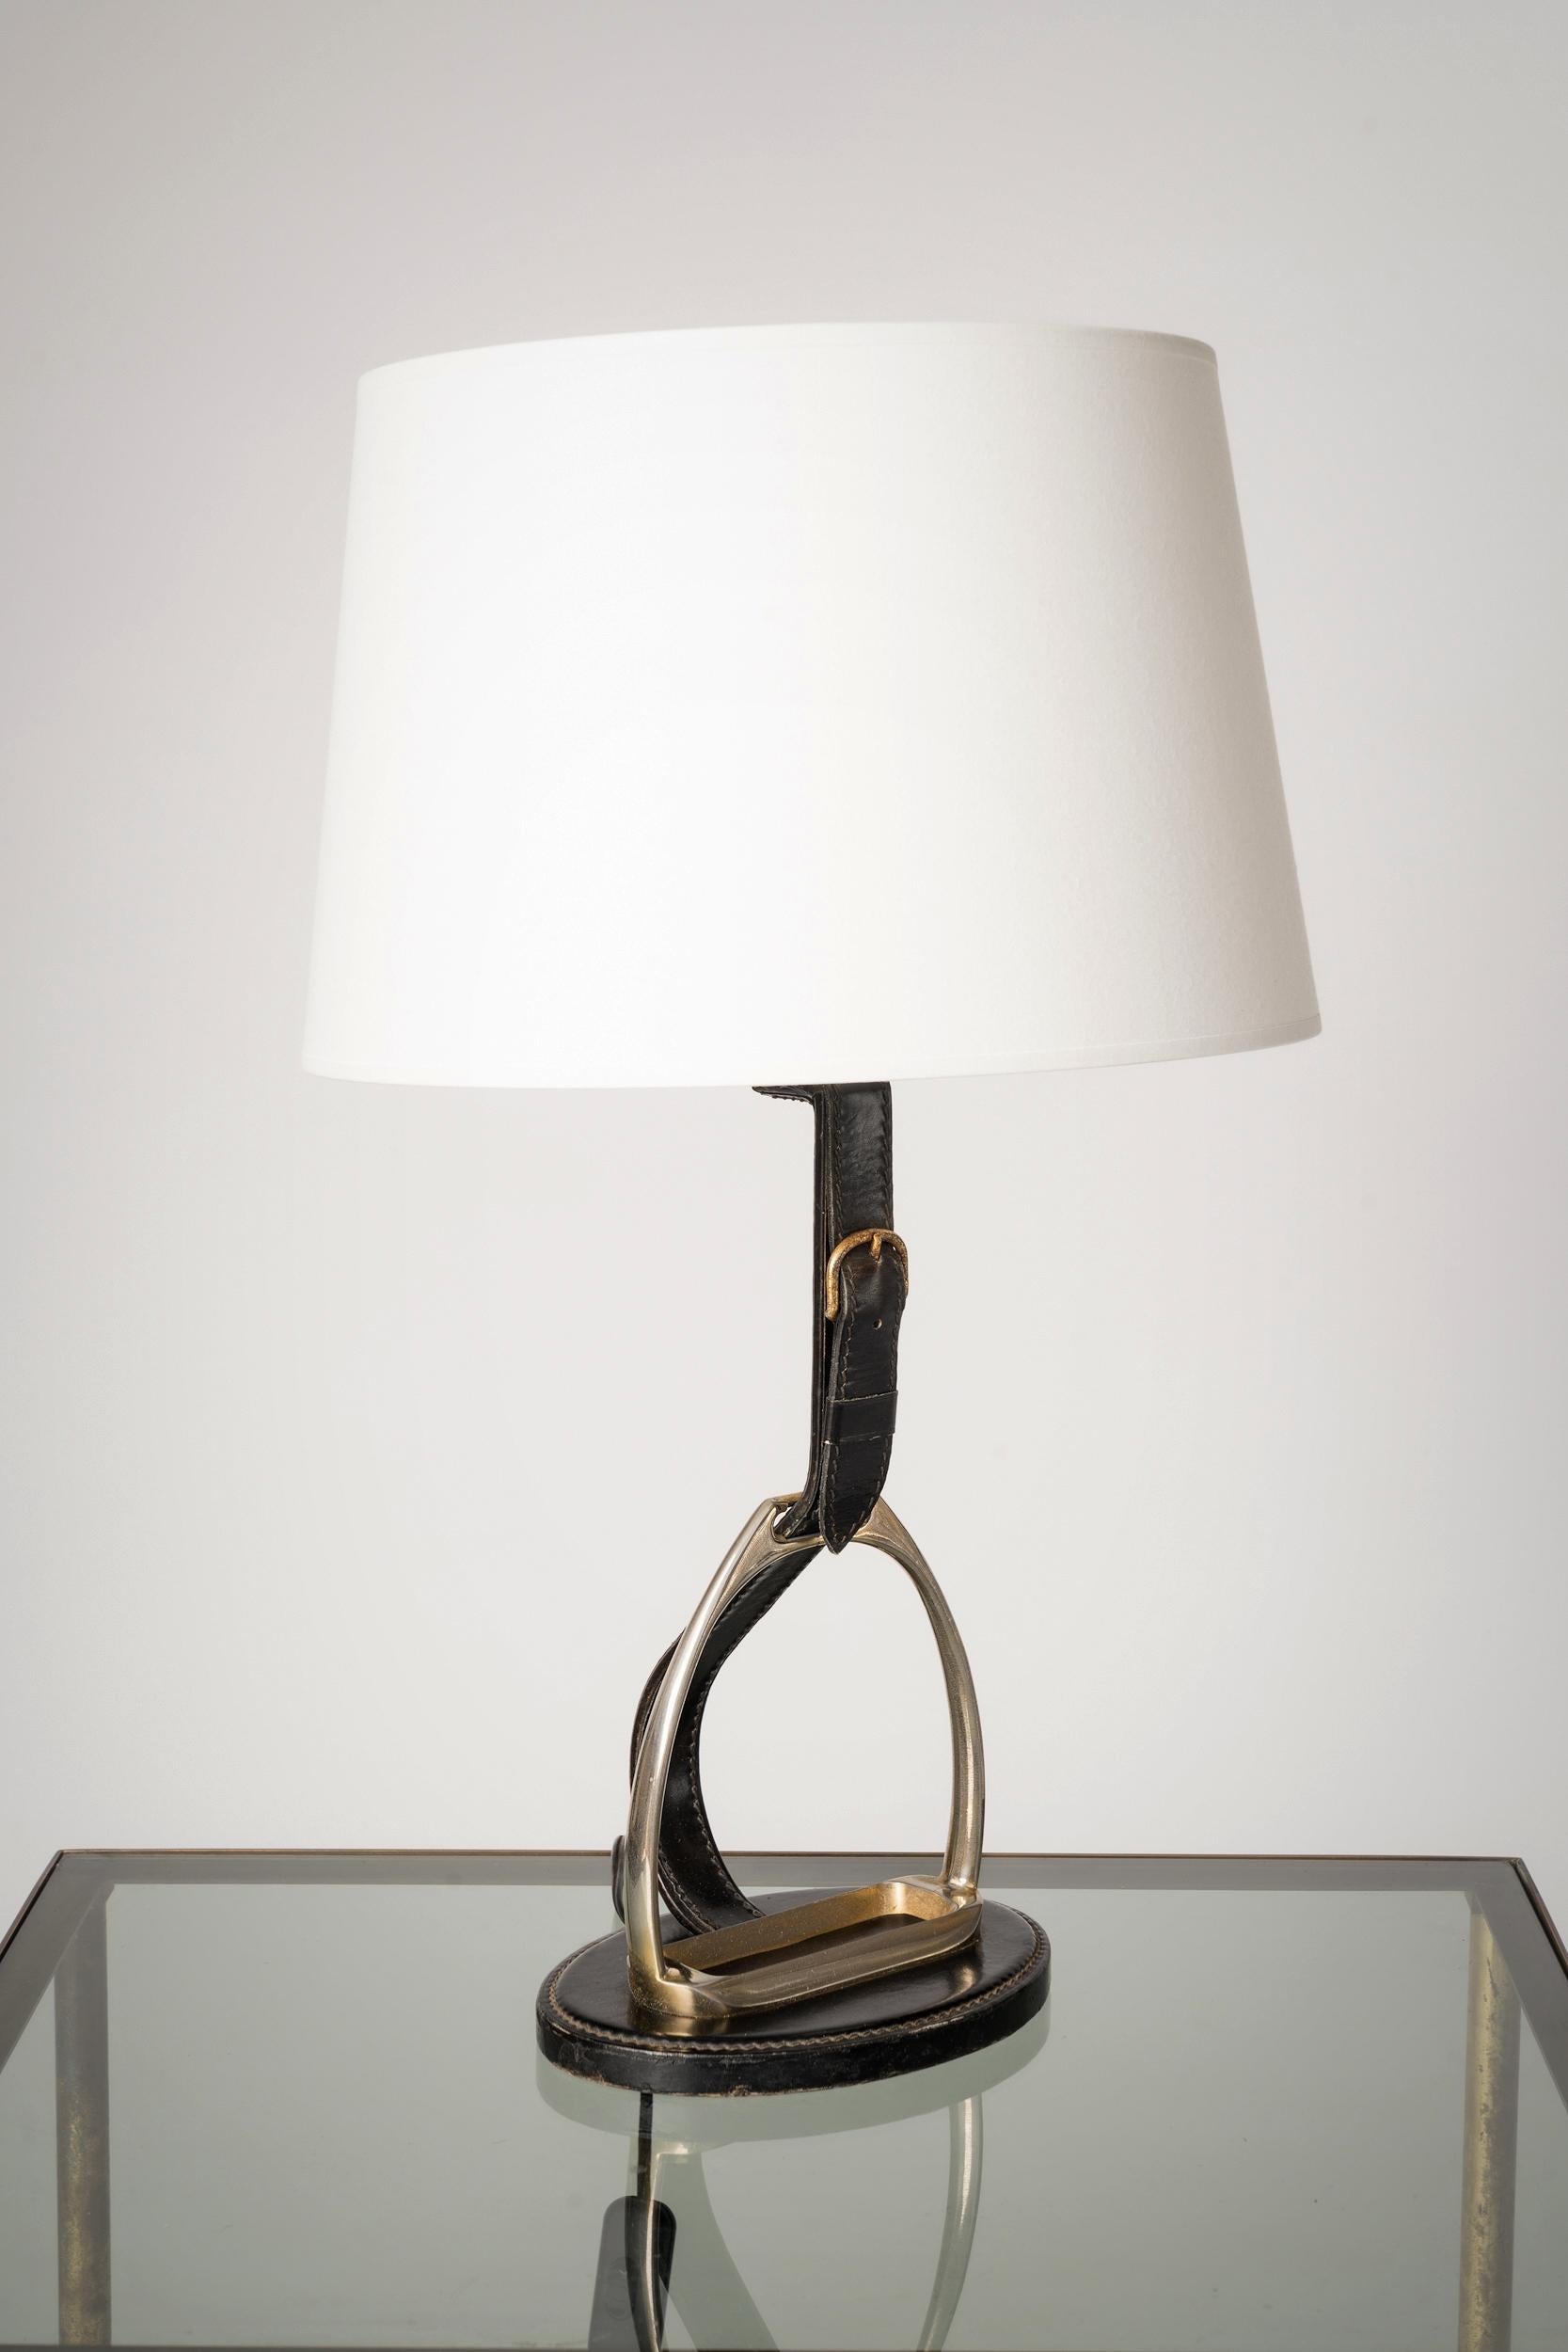 French Adnet Style Brass Horse Shoe & Black Stitched Leather Desk Lamp, France 1960's For Sale